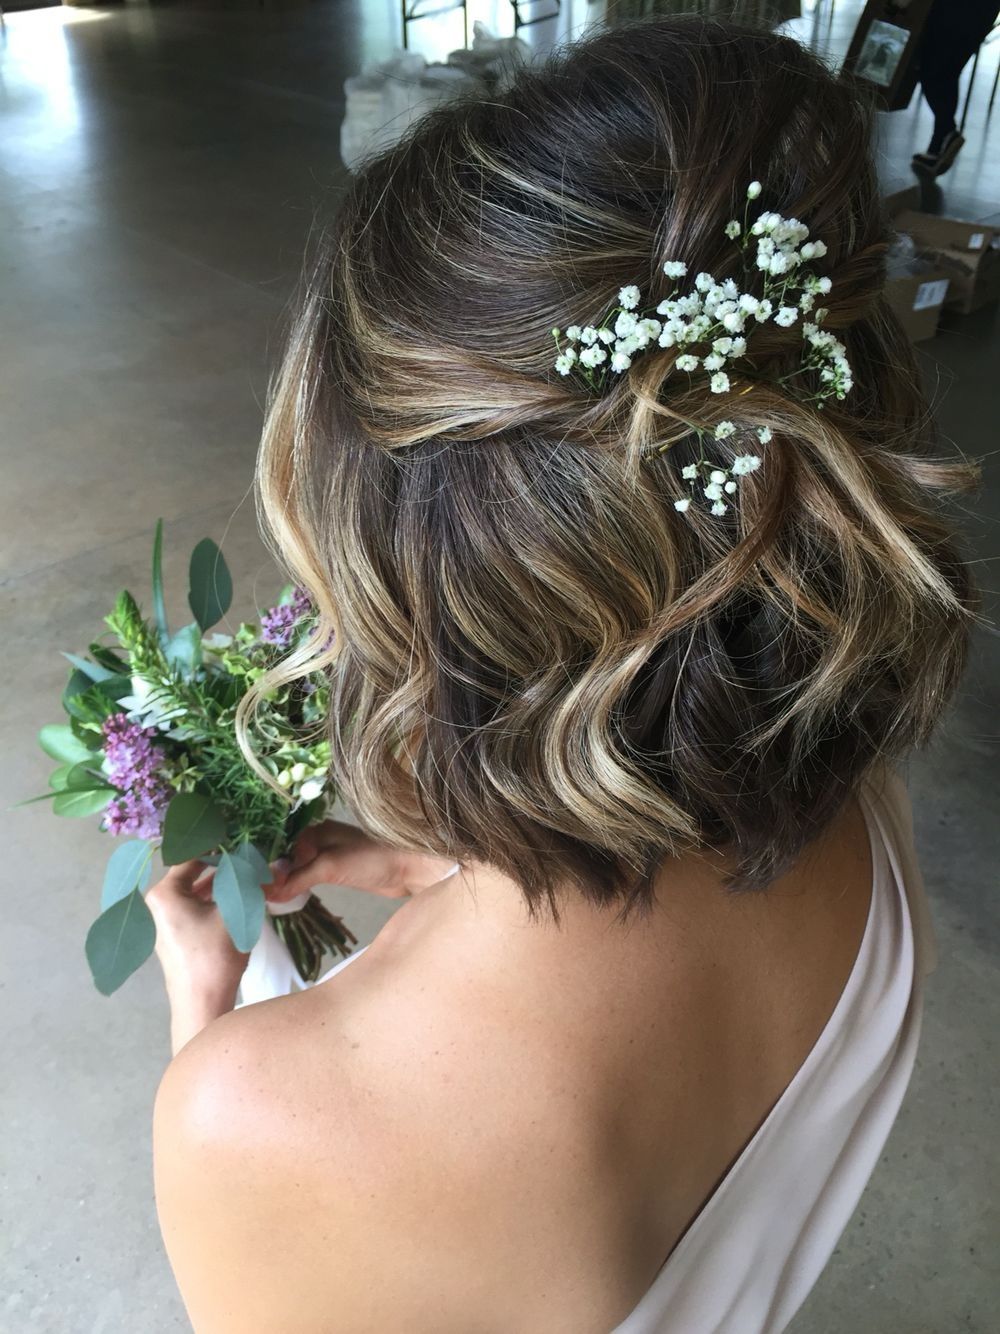 Bridesmaid Hairstyles For Short Hair | Best Hairstyles For For Short Hairstyles For Bridesmaids (Photo 2 of 25)